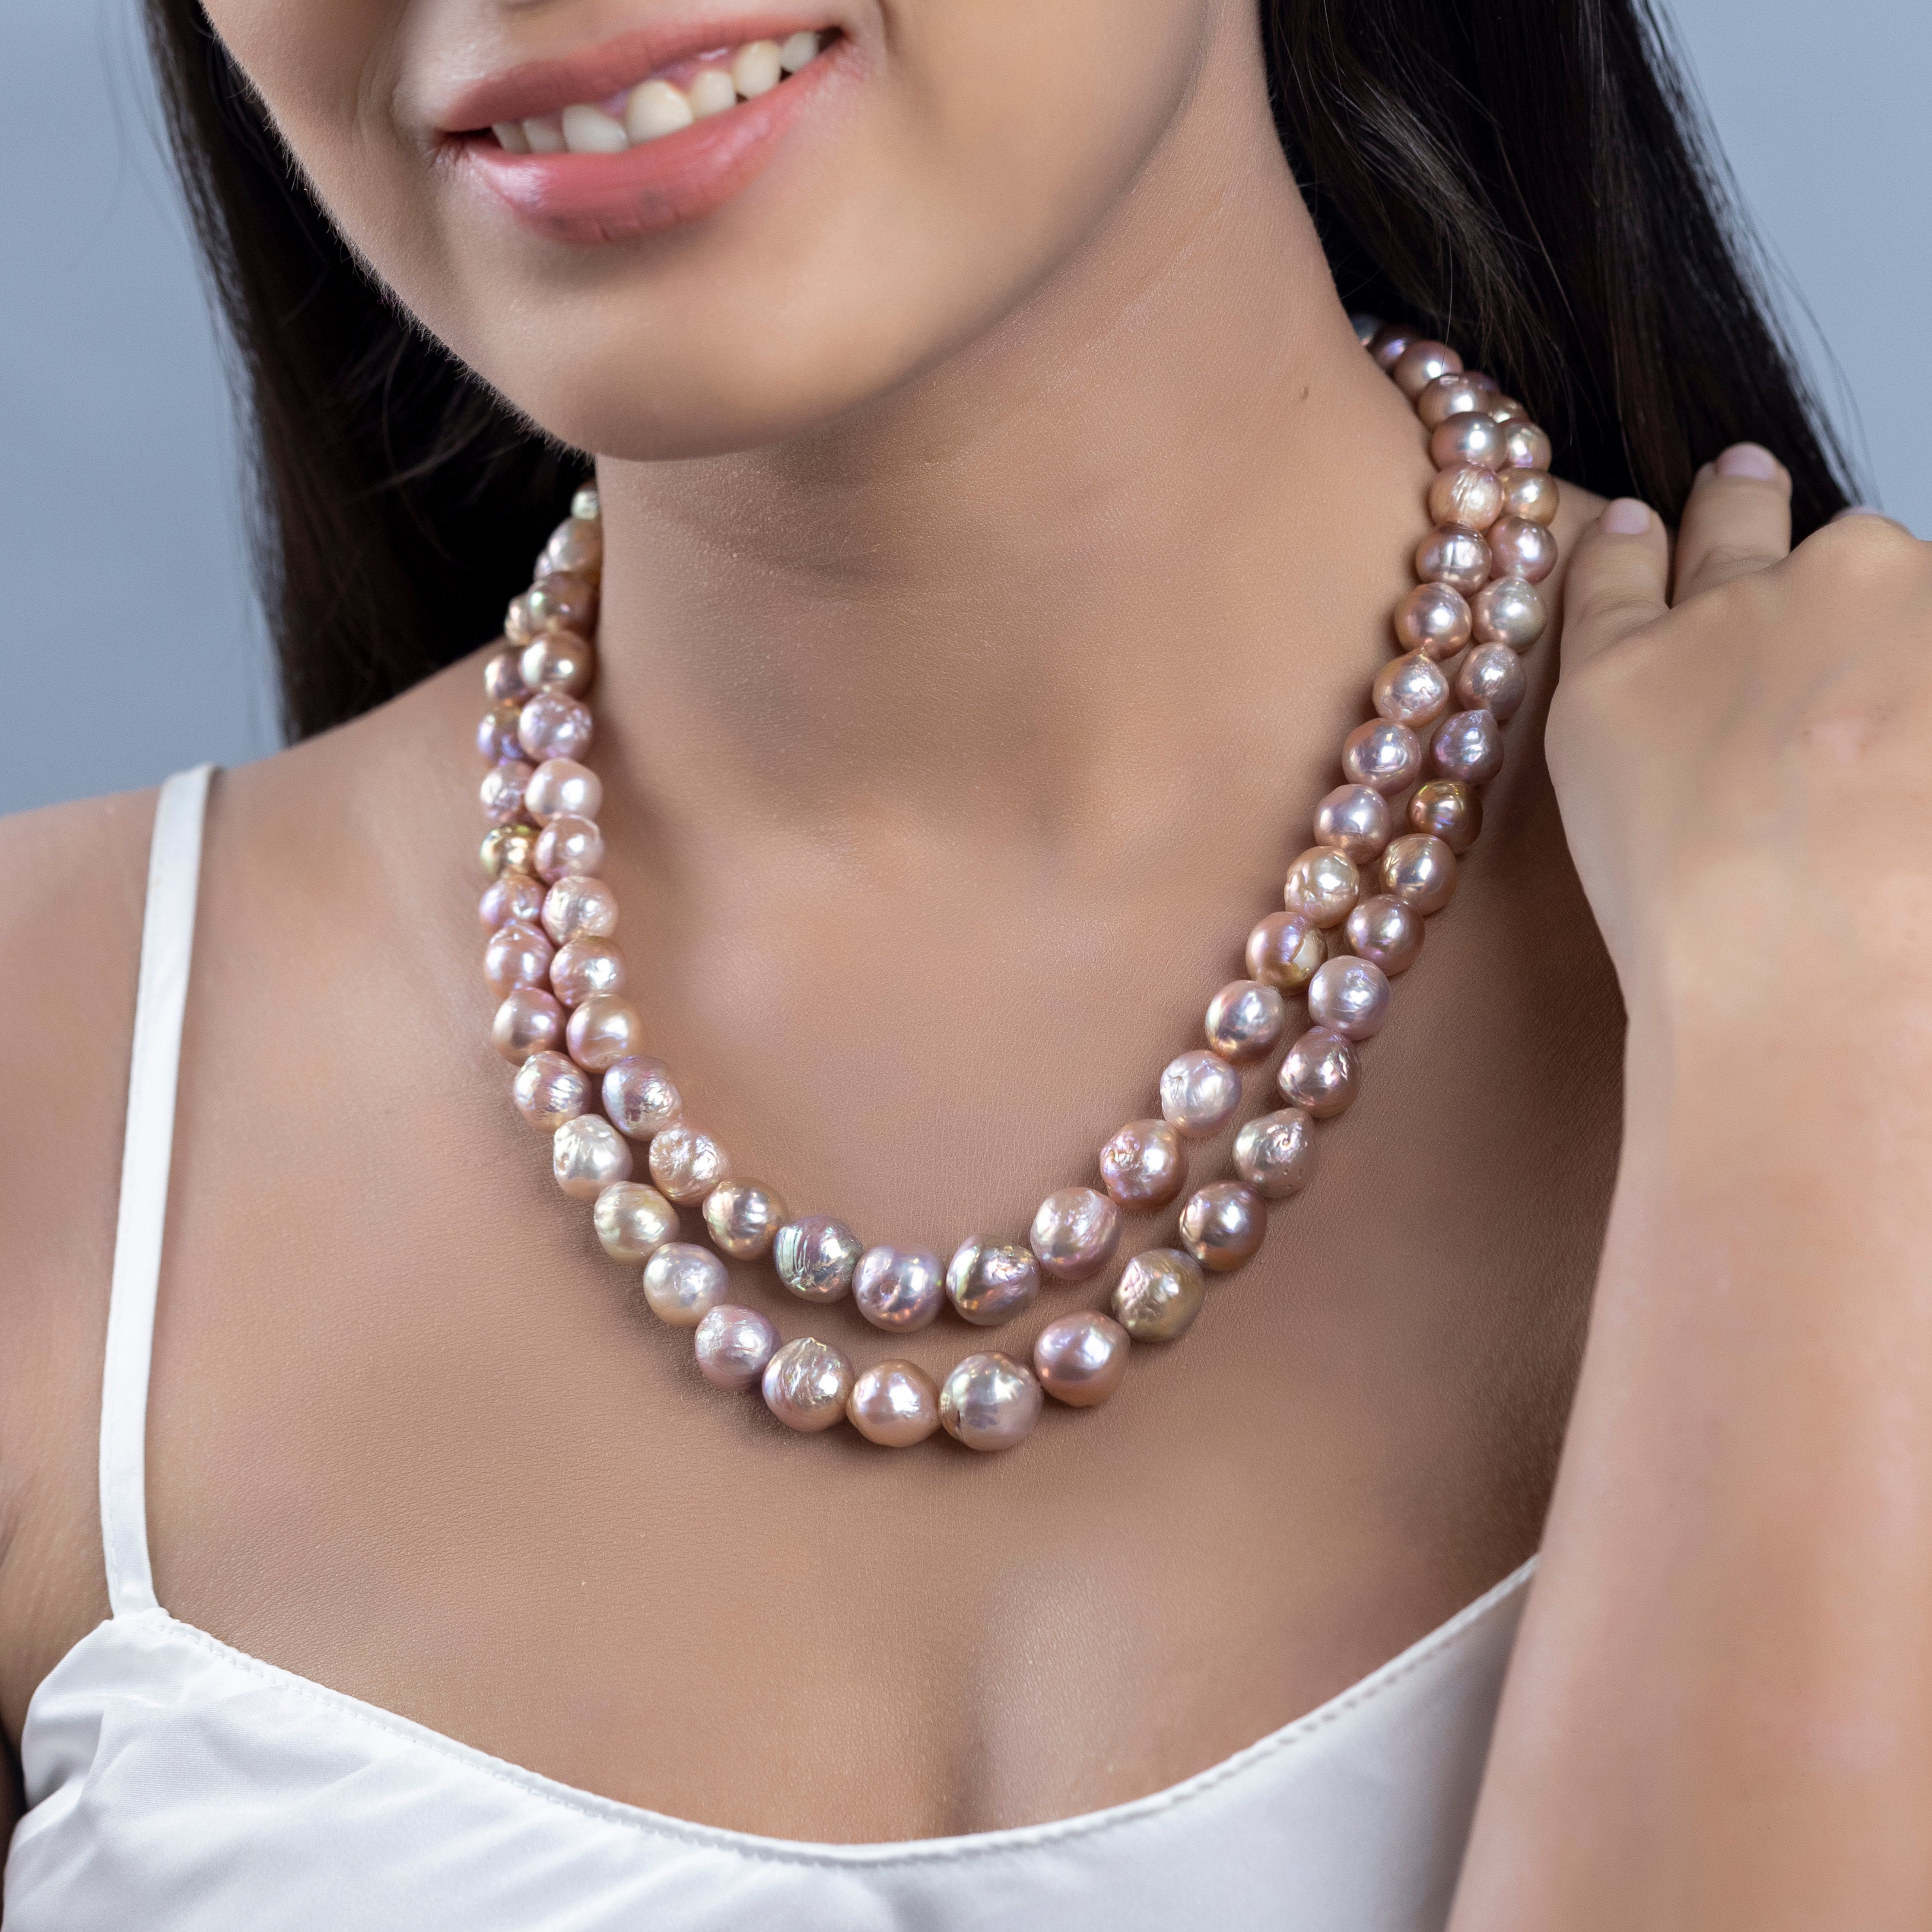 Freshwater Pink Baroque 2-line Pearl Necklace